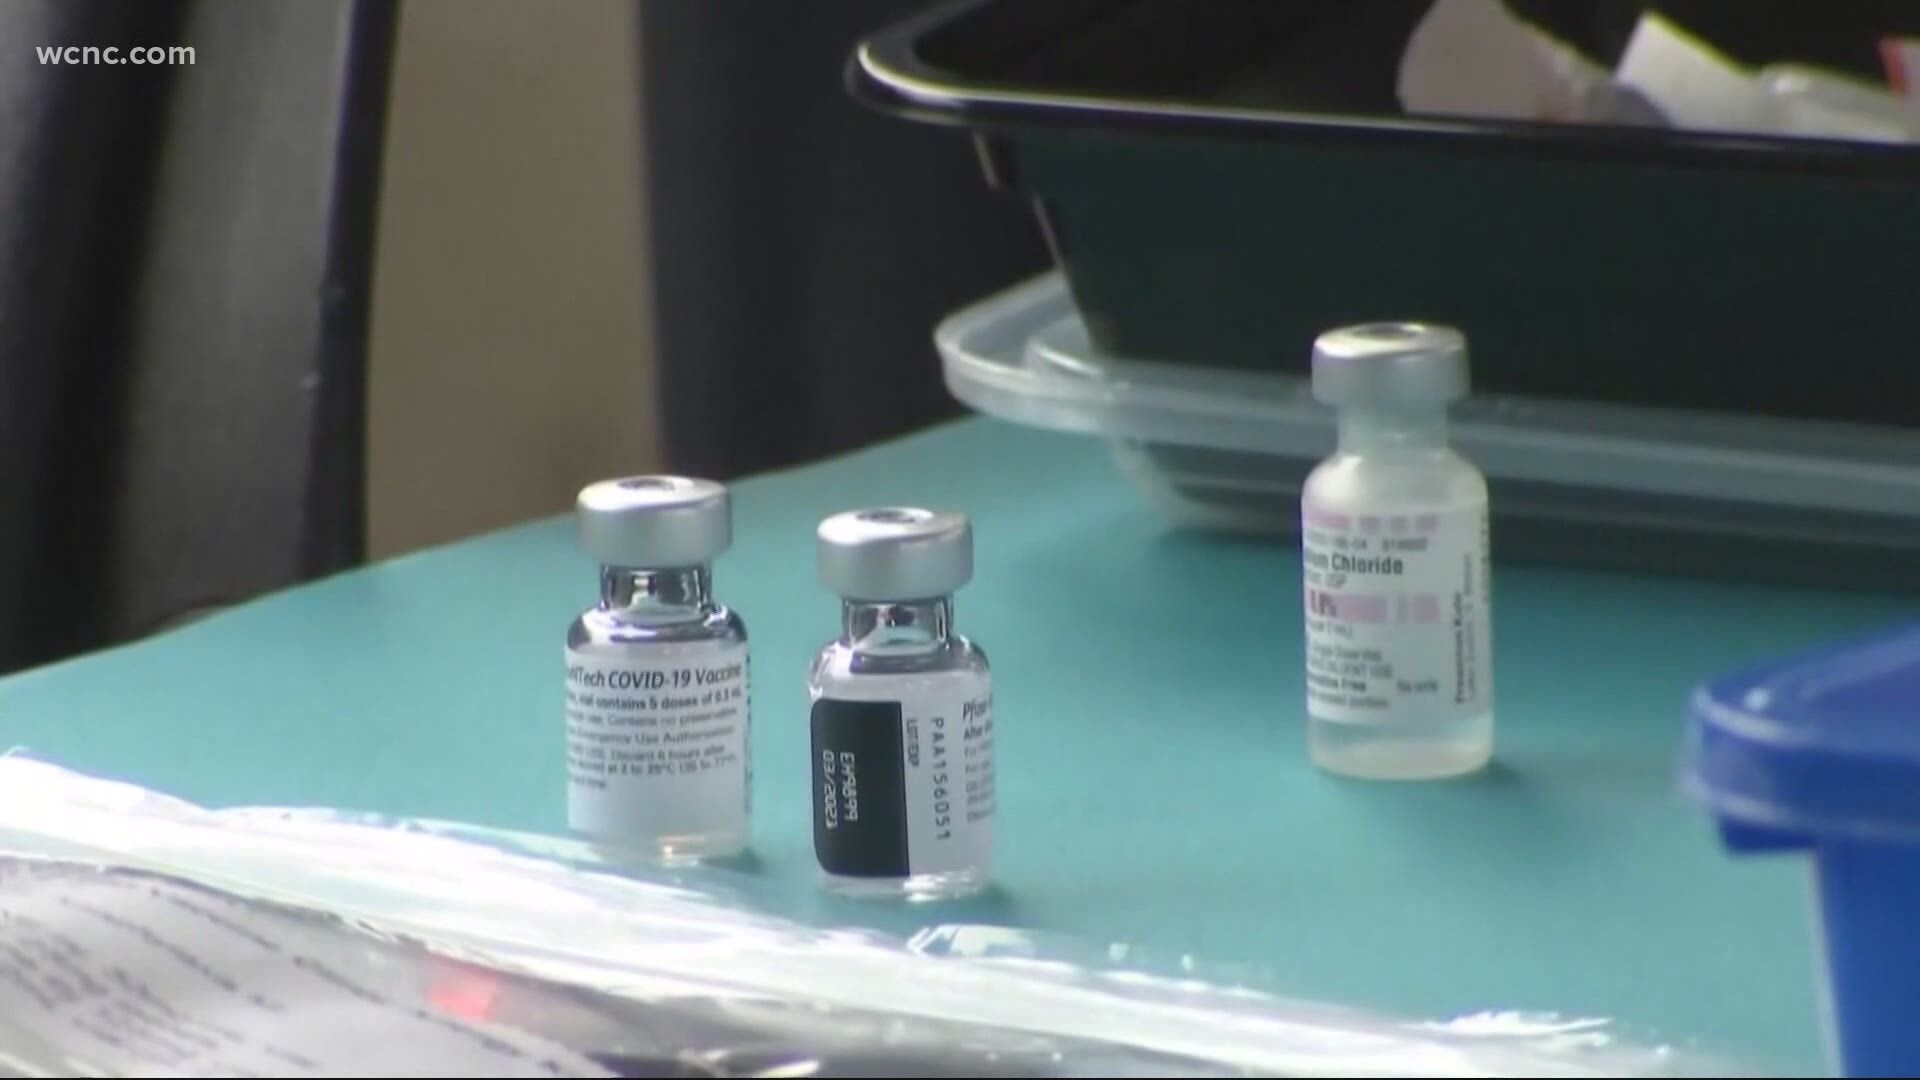 Mecklenburg County is trying to make the COVID-19 vaccine as convenient as possible with two vaccination events Friday afternoon.